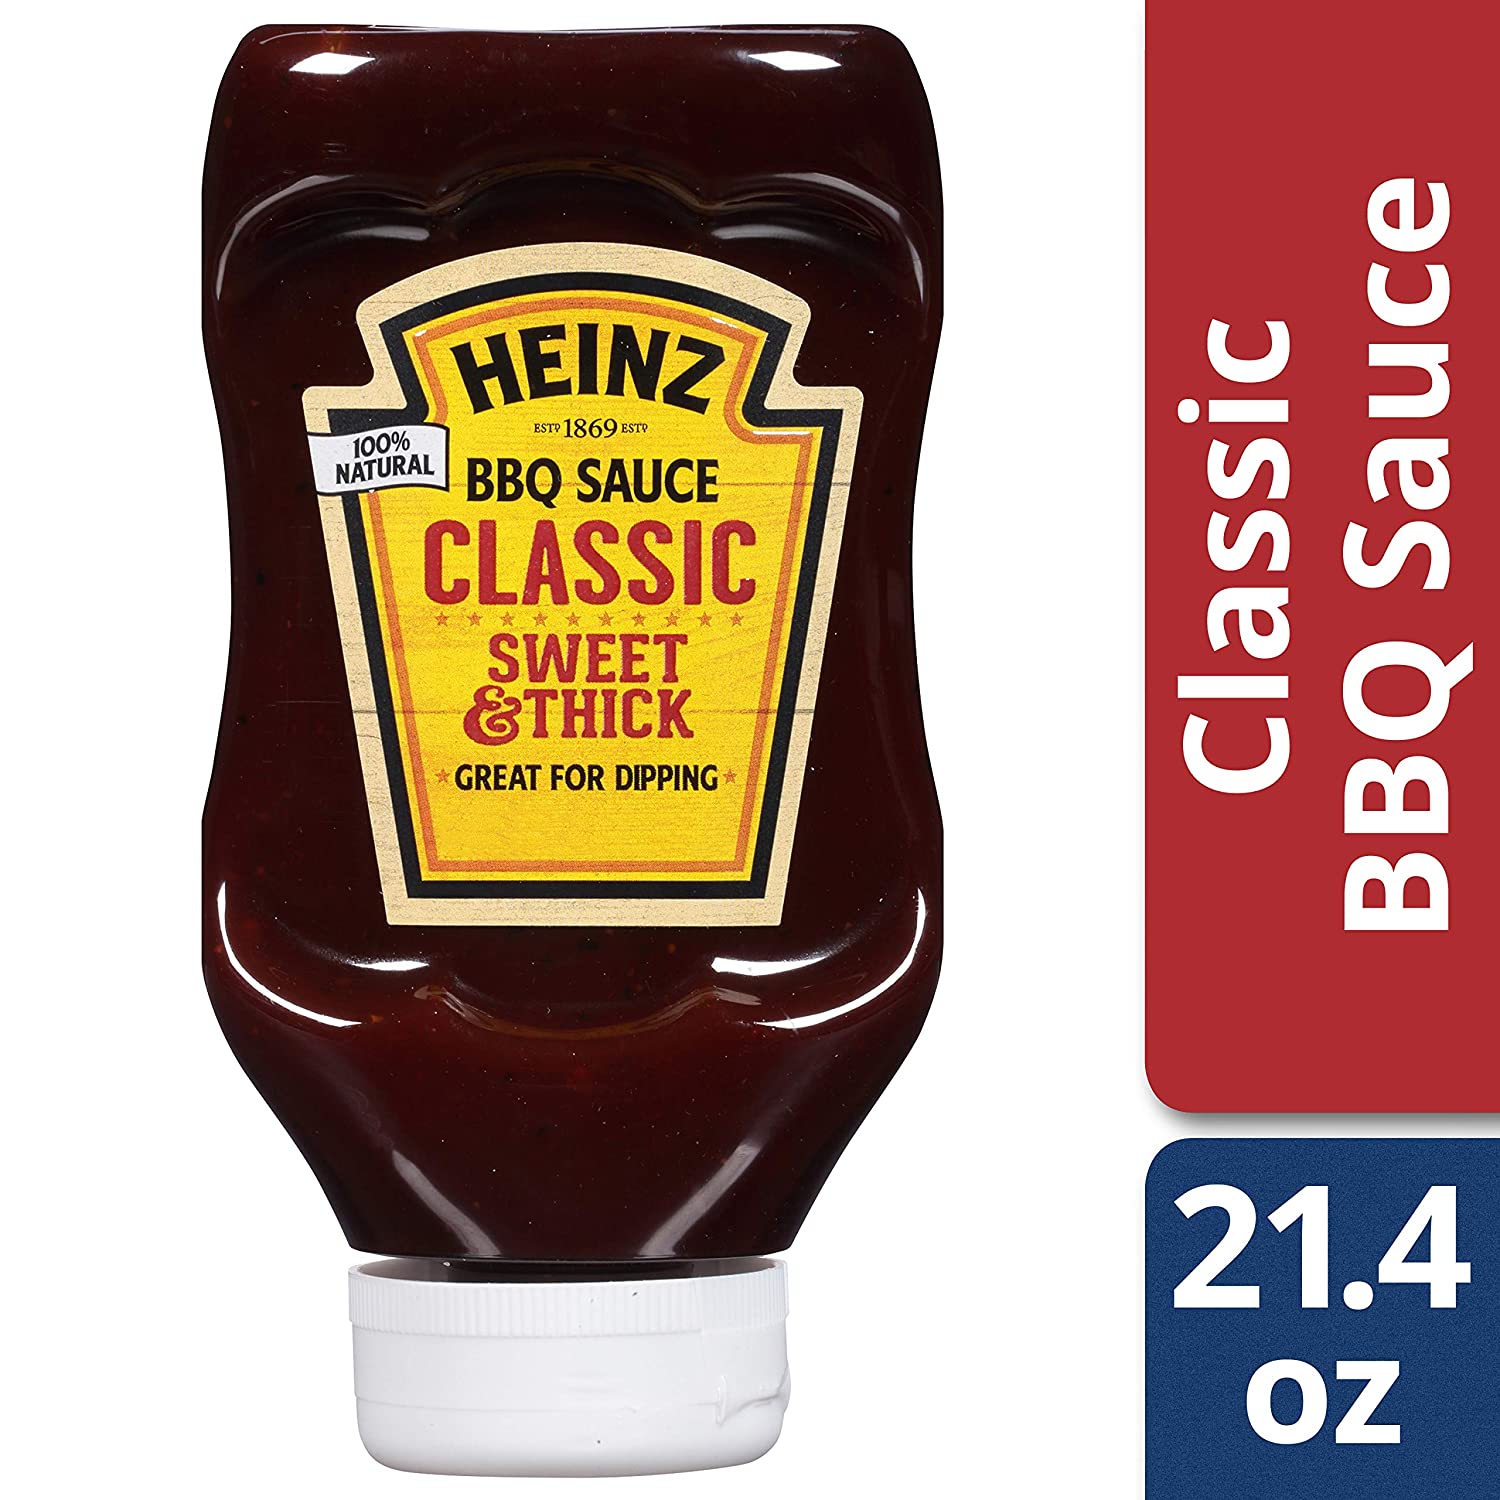 Heinz Sweet & Thick Classic Style BBQ Sauce (21.4 oz Bottles, Pack of 6) - image 2 of 2